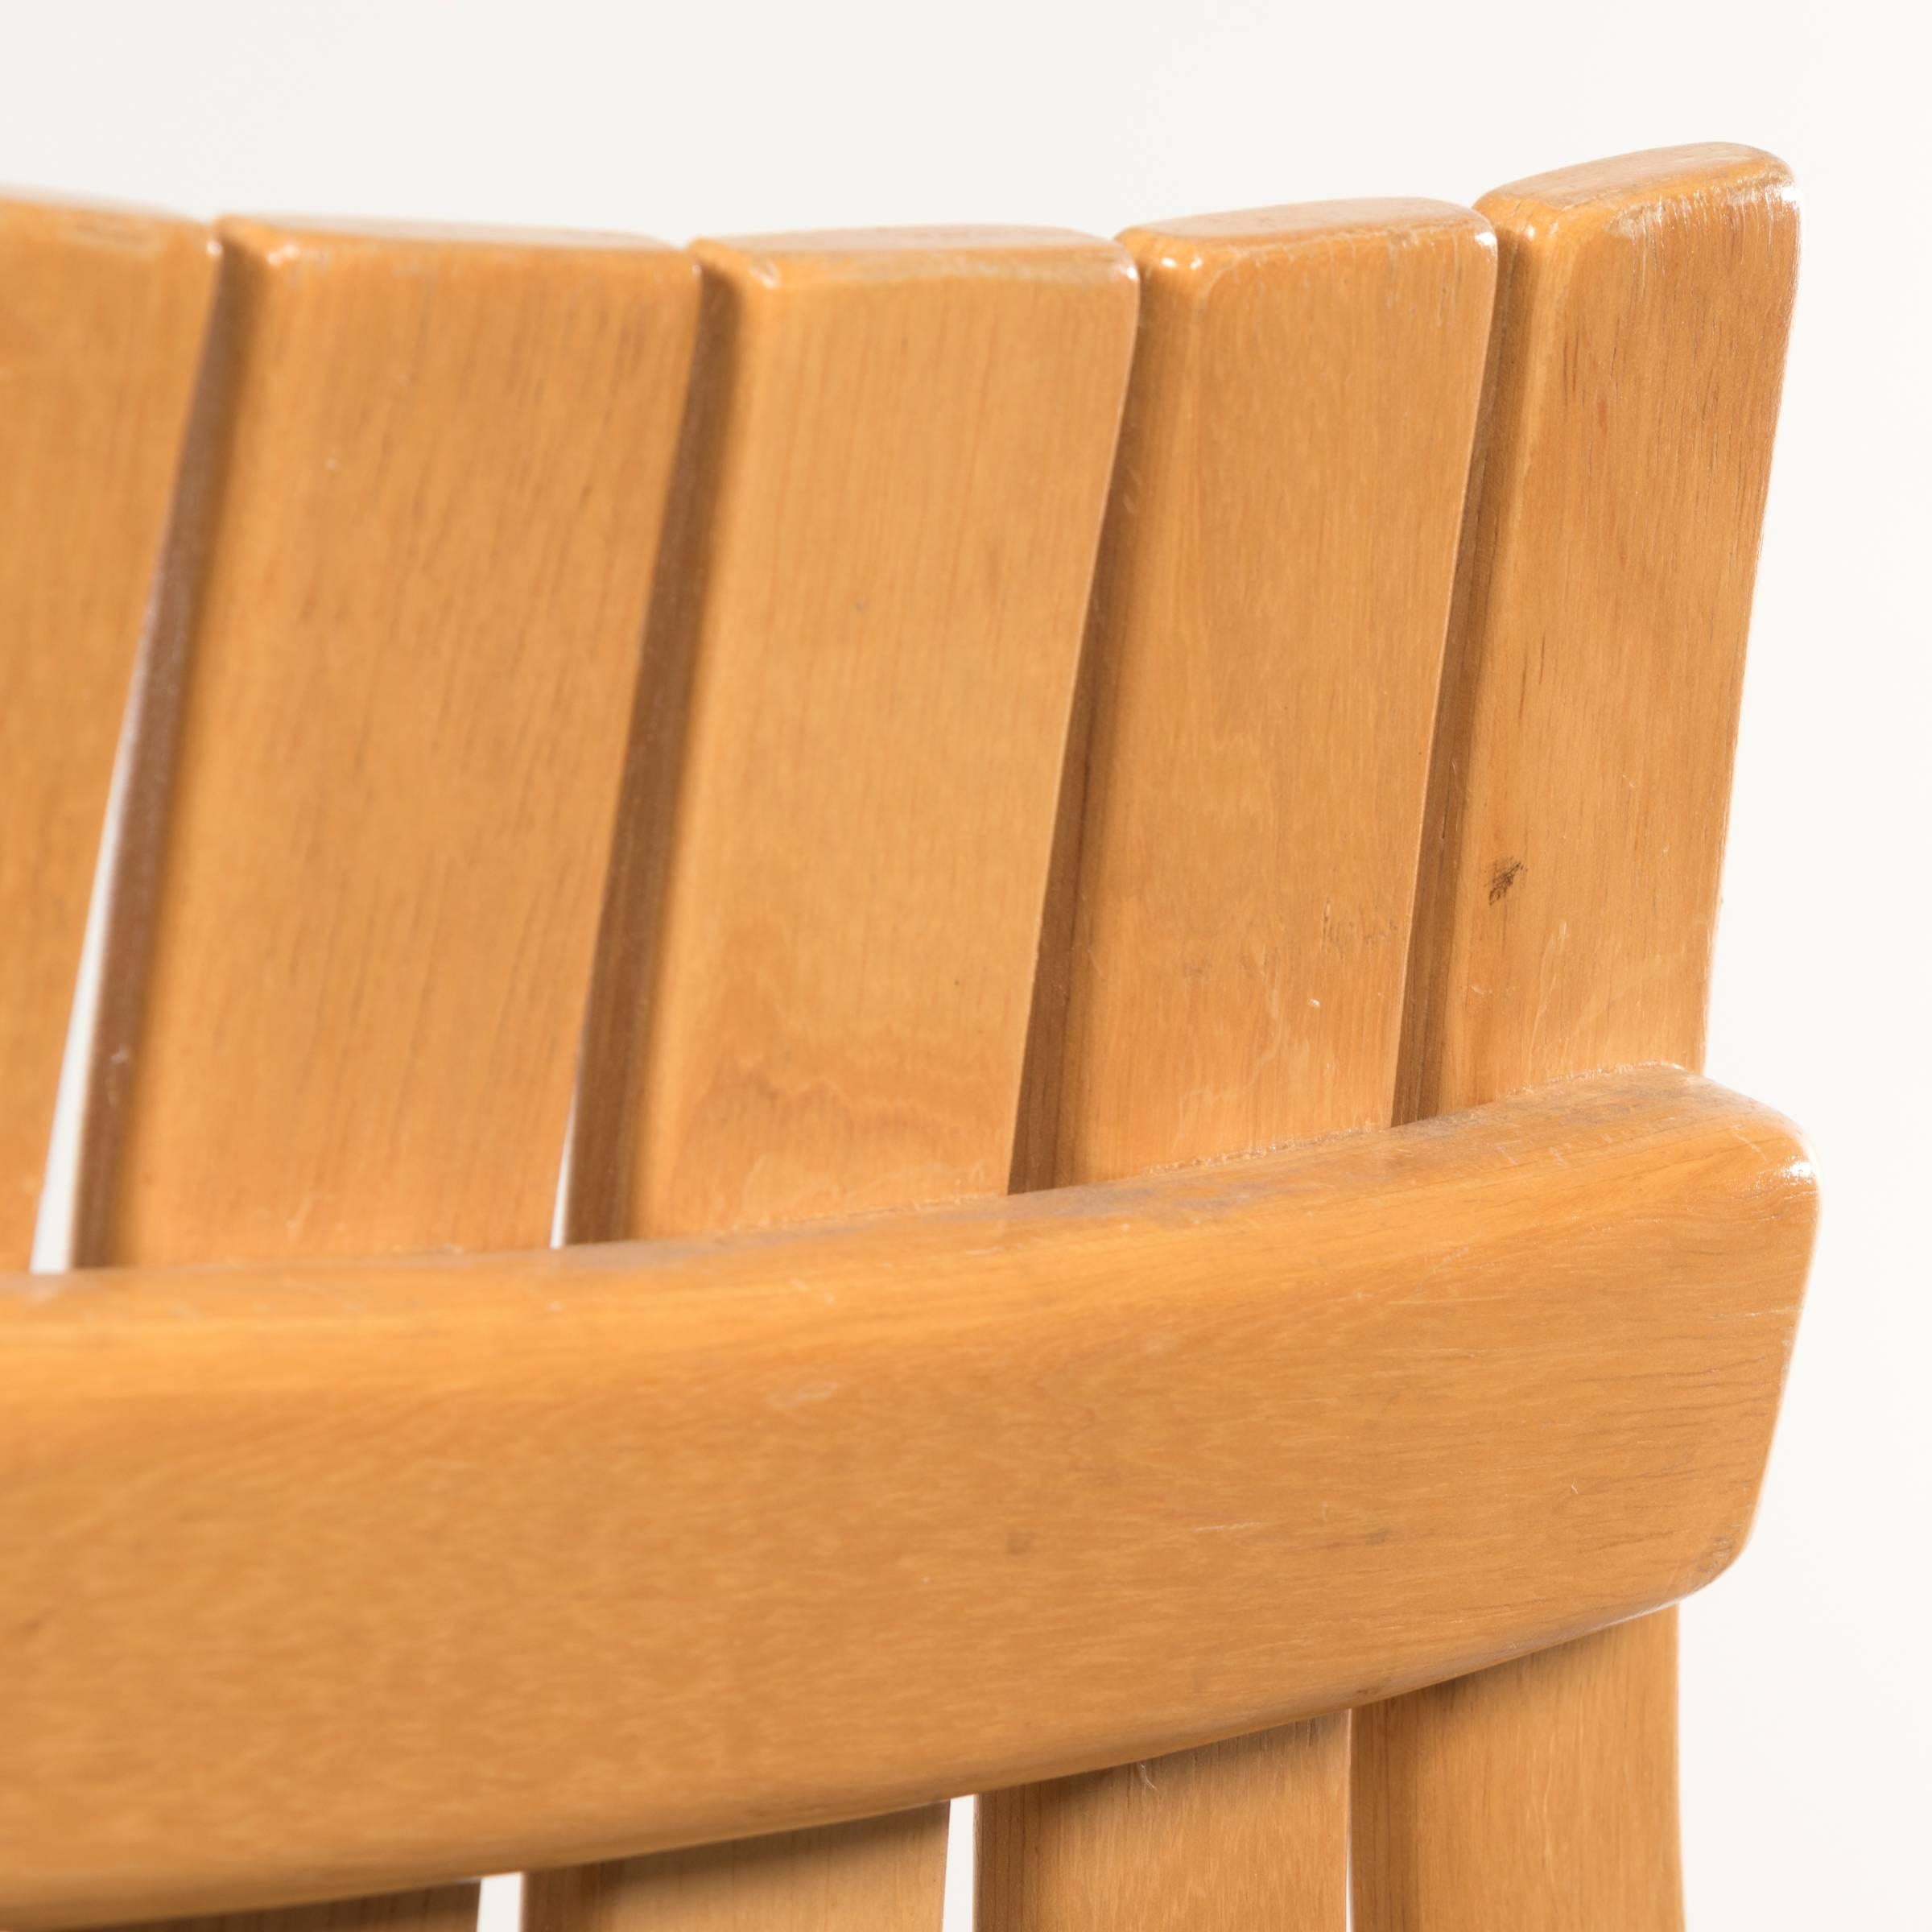 Hans Brattrud Beechwood Scandia Junior Side Chair for Hove Mobler, Norway 1